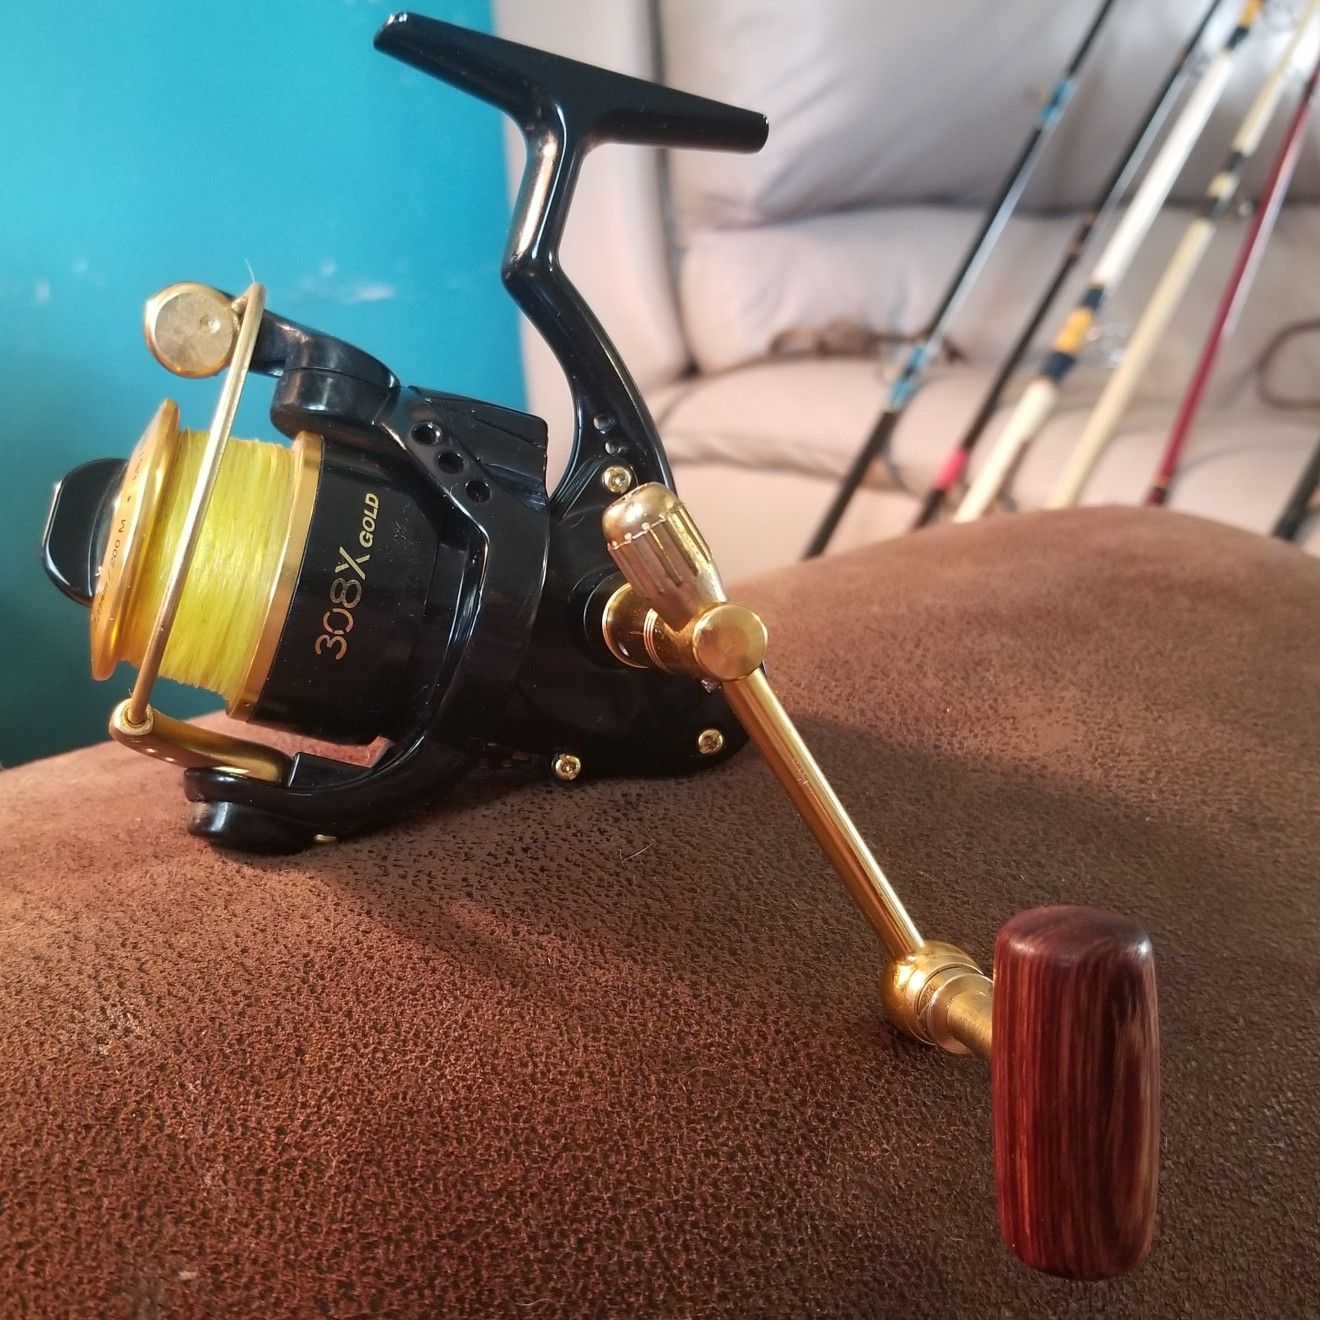 Mitchell 308x Gold Spinning Reel for Sale in Deltona, FL - OfferUp